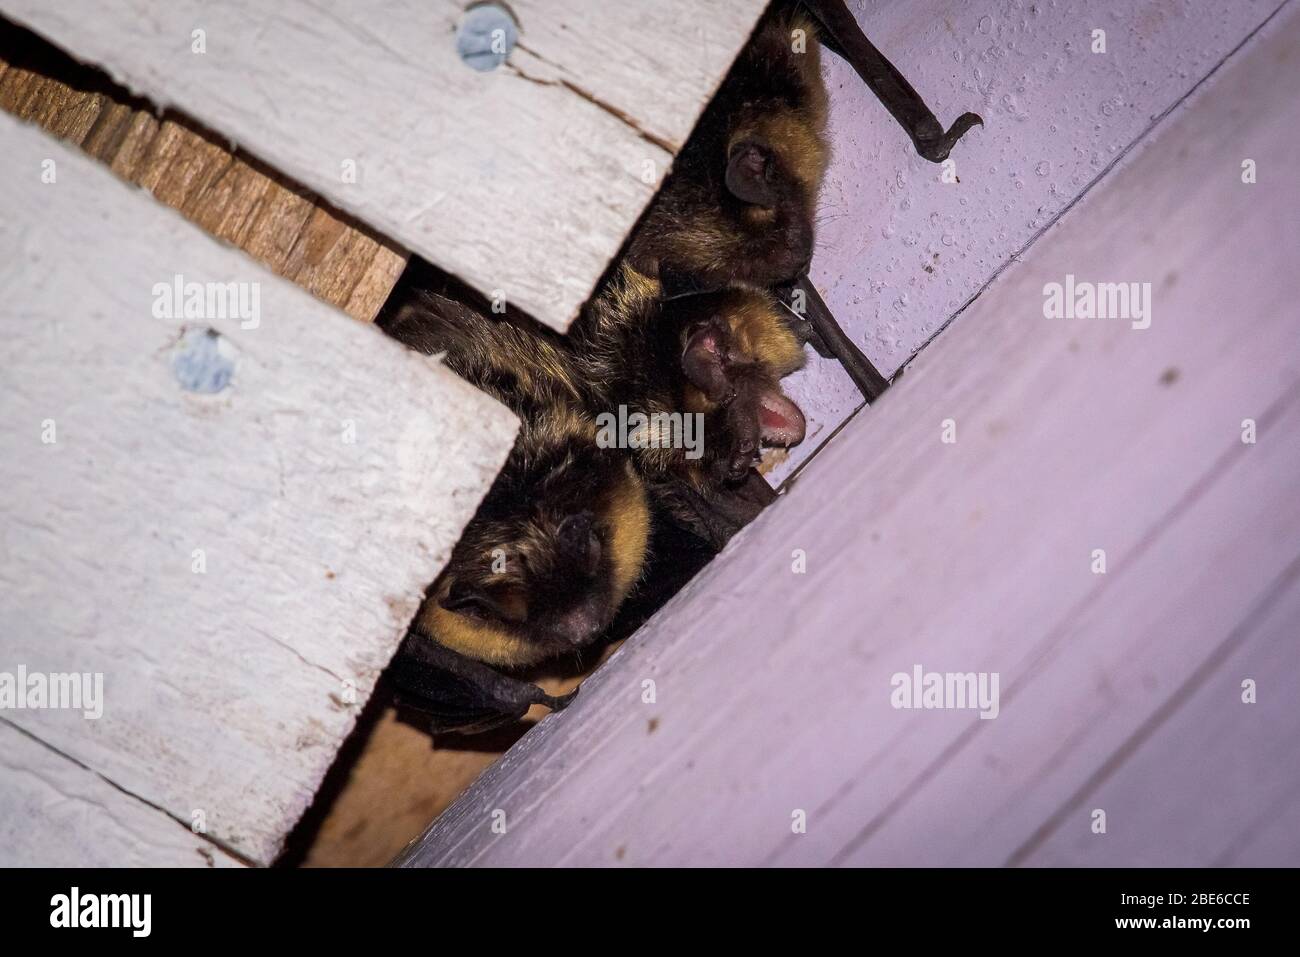 Northern bat inside the building Stock Photo